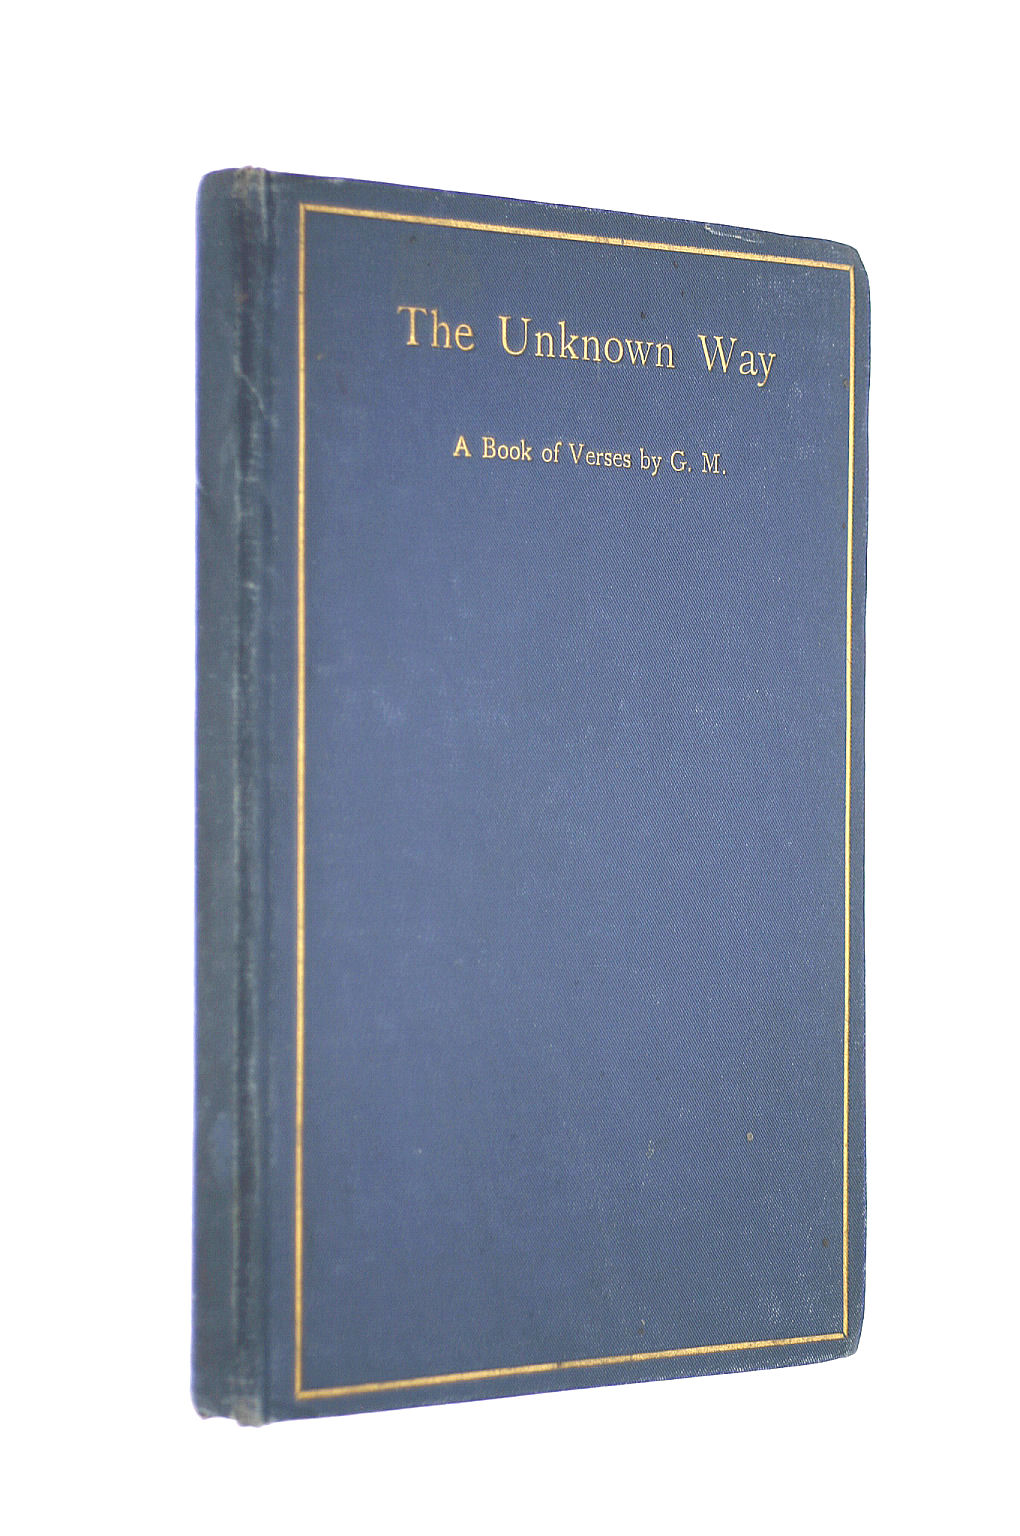 G. M. - The Unknown Way, A Book of Verses